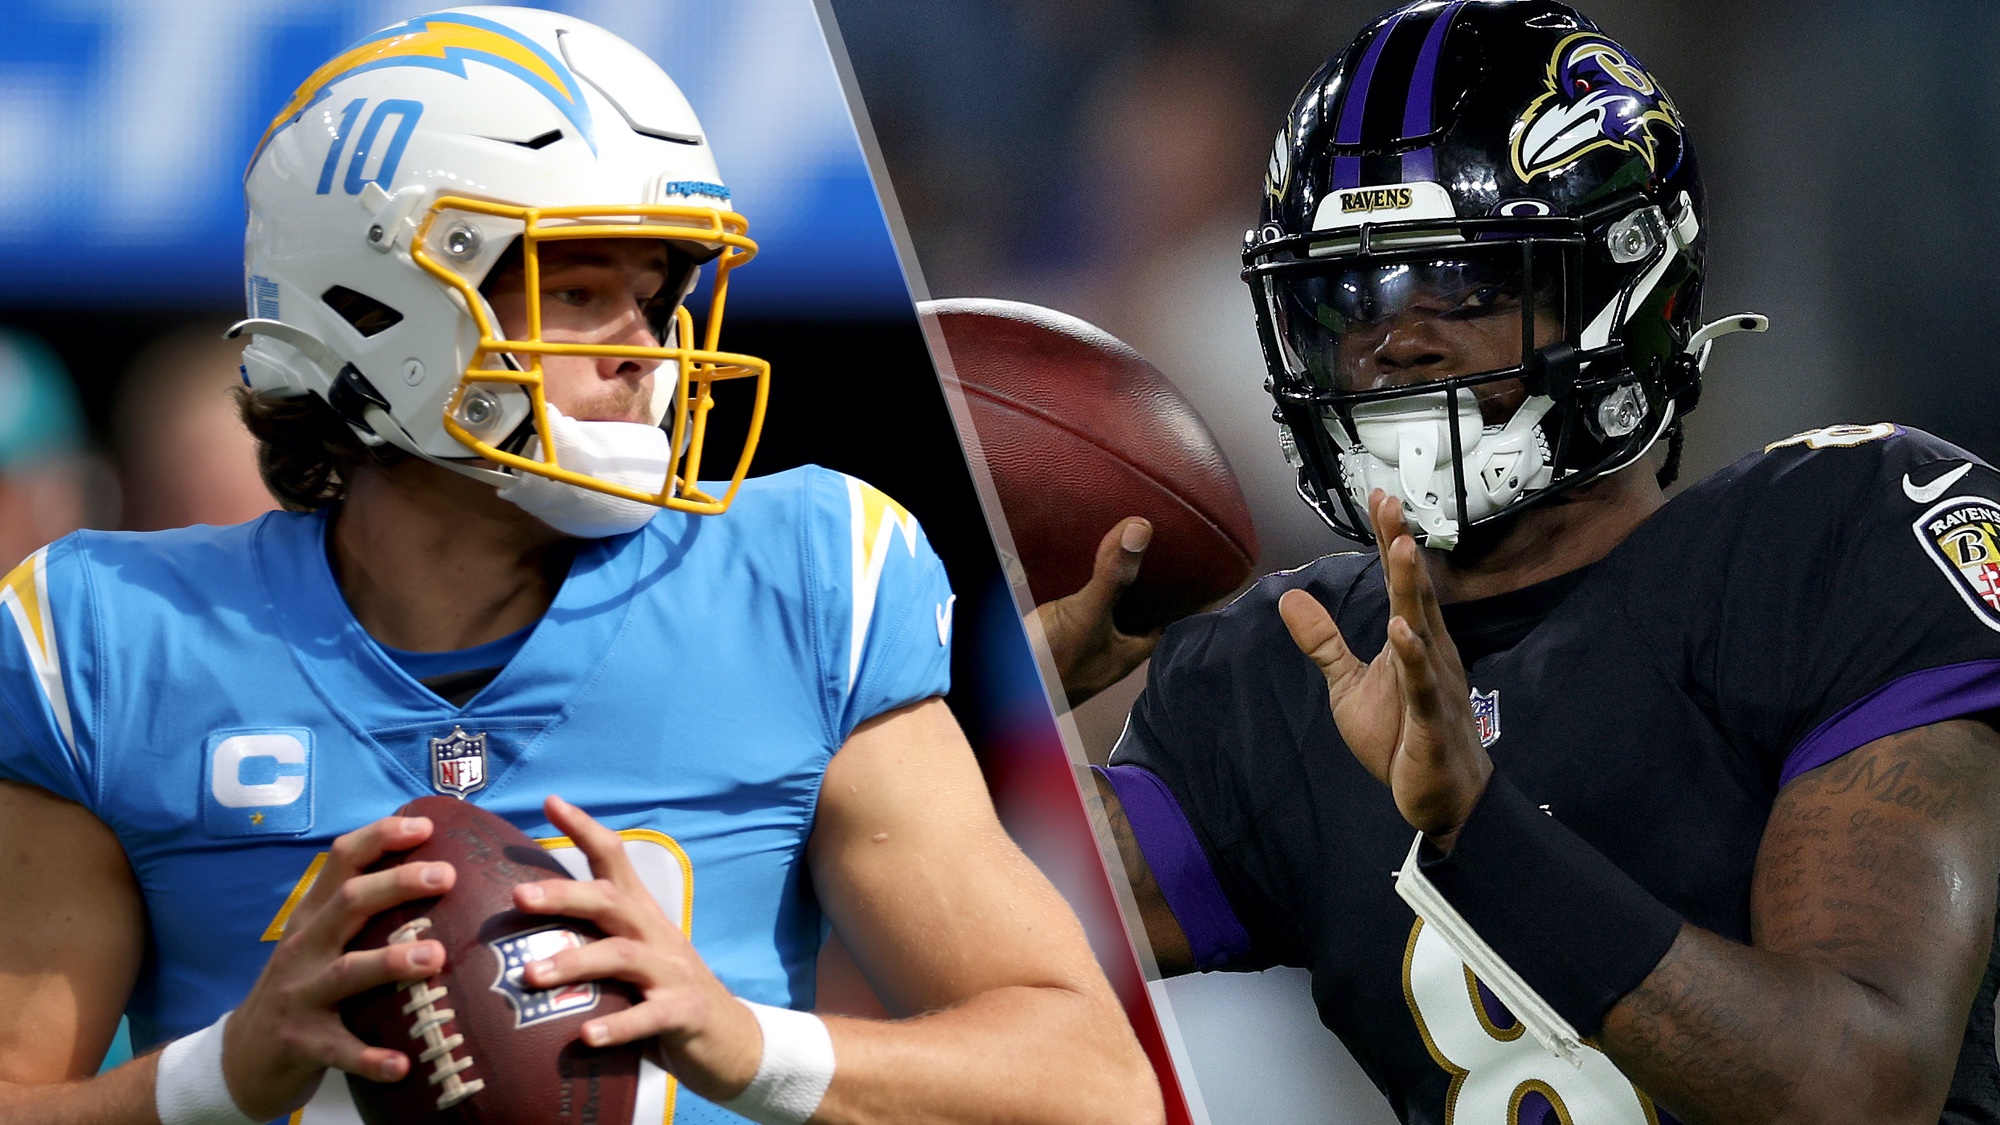 The Chargers vs Ravens live stream is here: How to watch NFL week